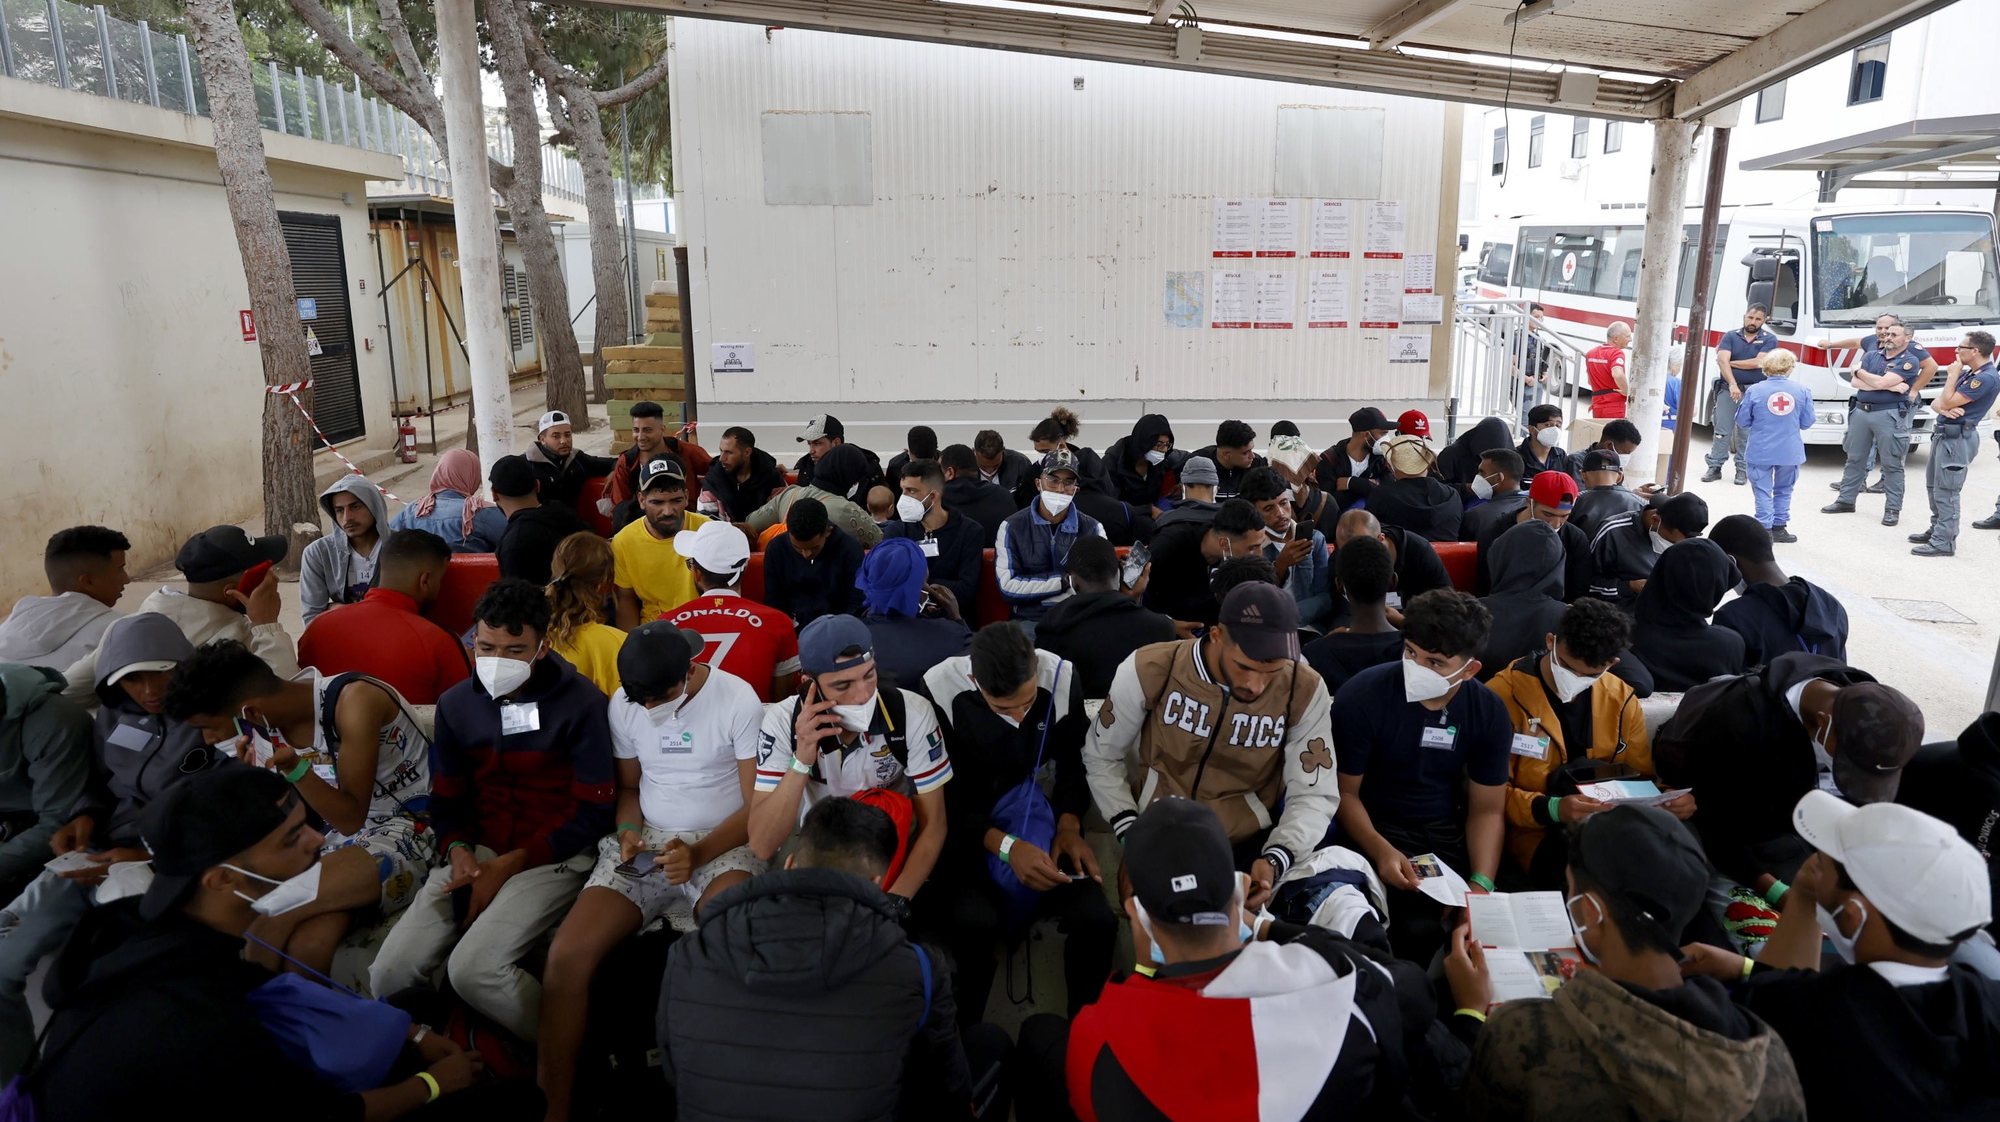 epa10692630 Migrants inside the immigrant reception facility, or &#039;hotspot&#039; on the Sicilian island of Lampedusa (Agrigento), southern Italy, 14 June 2023 (issued 15 June 2023). The Lampedusa hotspot, with a capacity to host about 650 people, is managed by the Italian Red Cross (CRI). The center is intended to provide preliminary reception, identification and triage for migrants and refugees arriving on the tiny southern Italian island. Located in the Mediterranean between Malta and Tunisia, Lampedusa is a transit point for migrants from Africa, the Middle East and Asia seeking a better life in Europe. Upcoming 20 June 2023 marks World Refugee Day under the theme &#039;hope away from home&#039;. The annual international day celebrates the people around the glove who have been forced to flee their home country to escape conflict or persecution.  EPA/VINCENZO LIVIERI  ATTENTION: This Image is part of a PHOTO SET